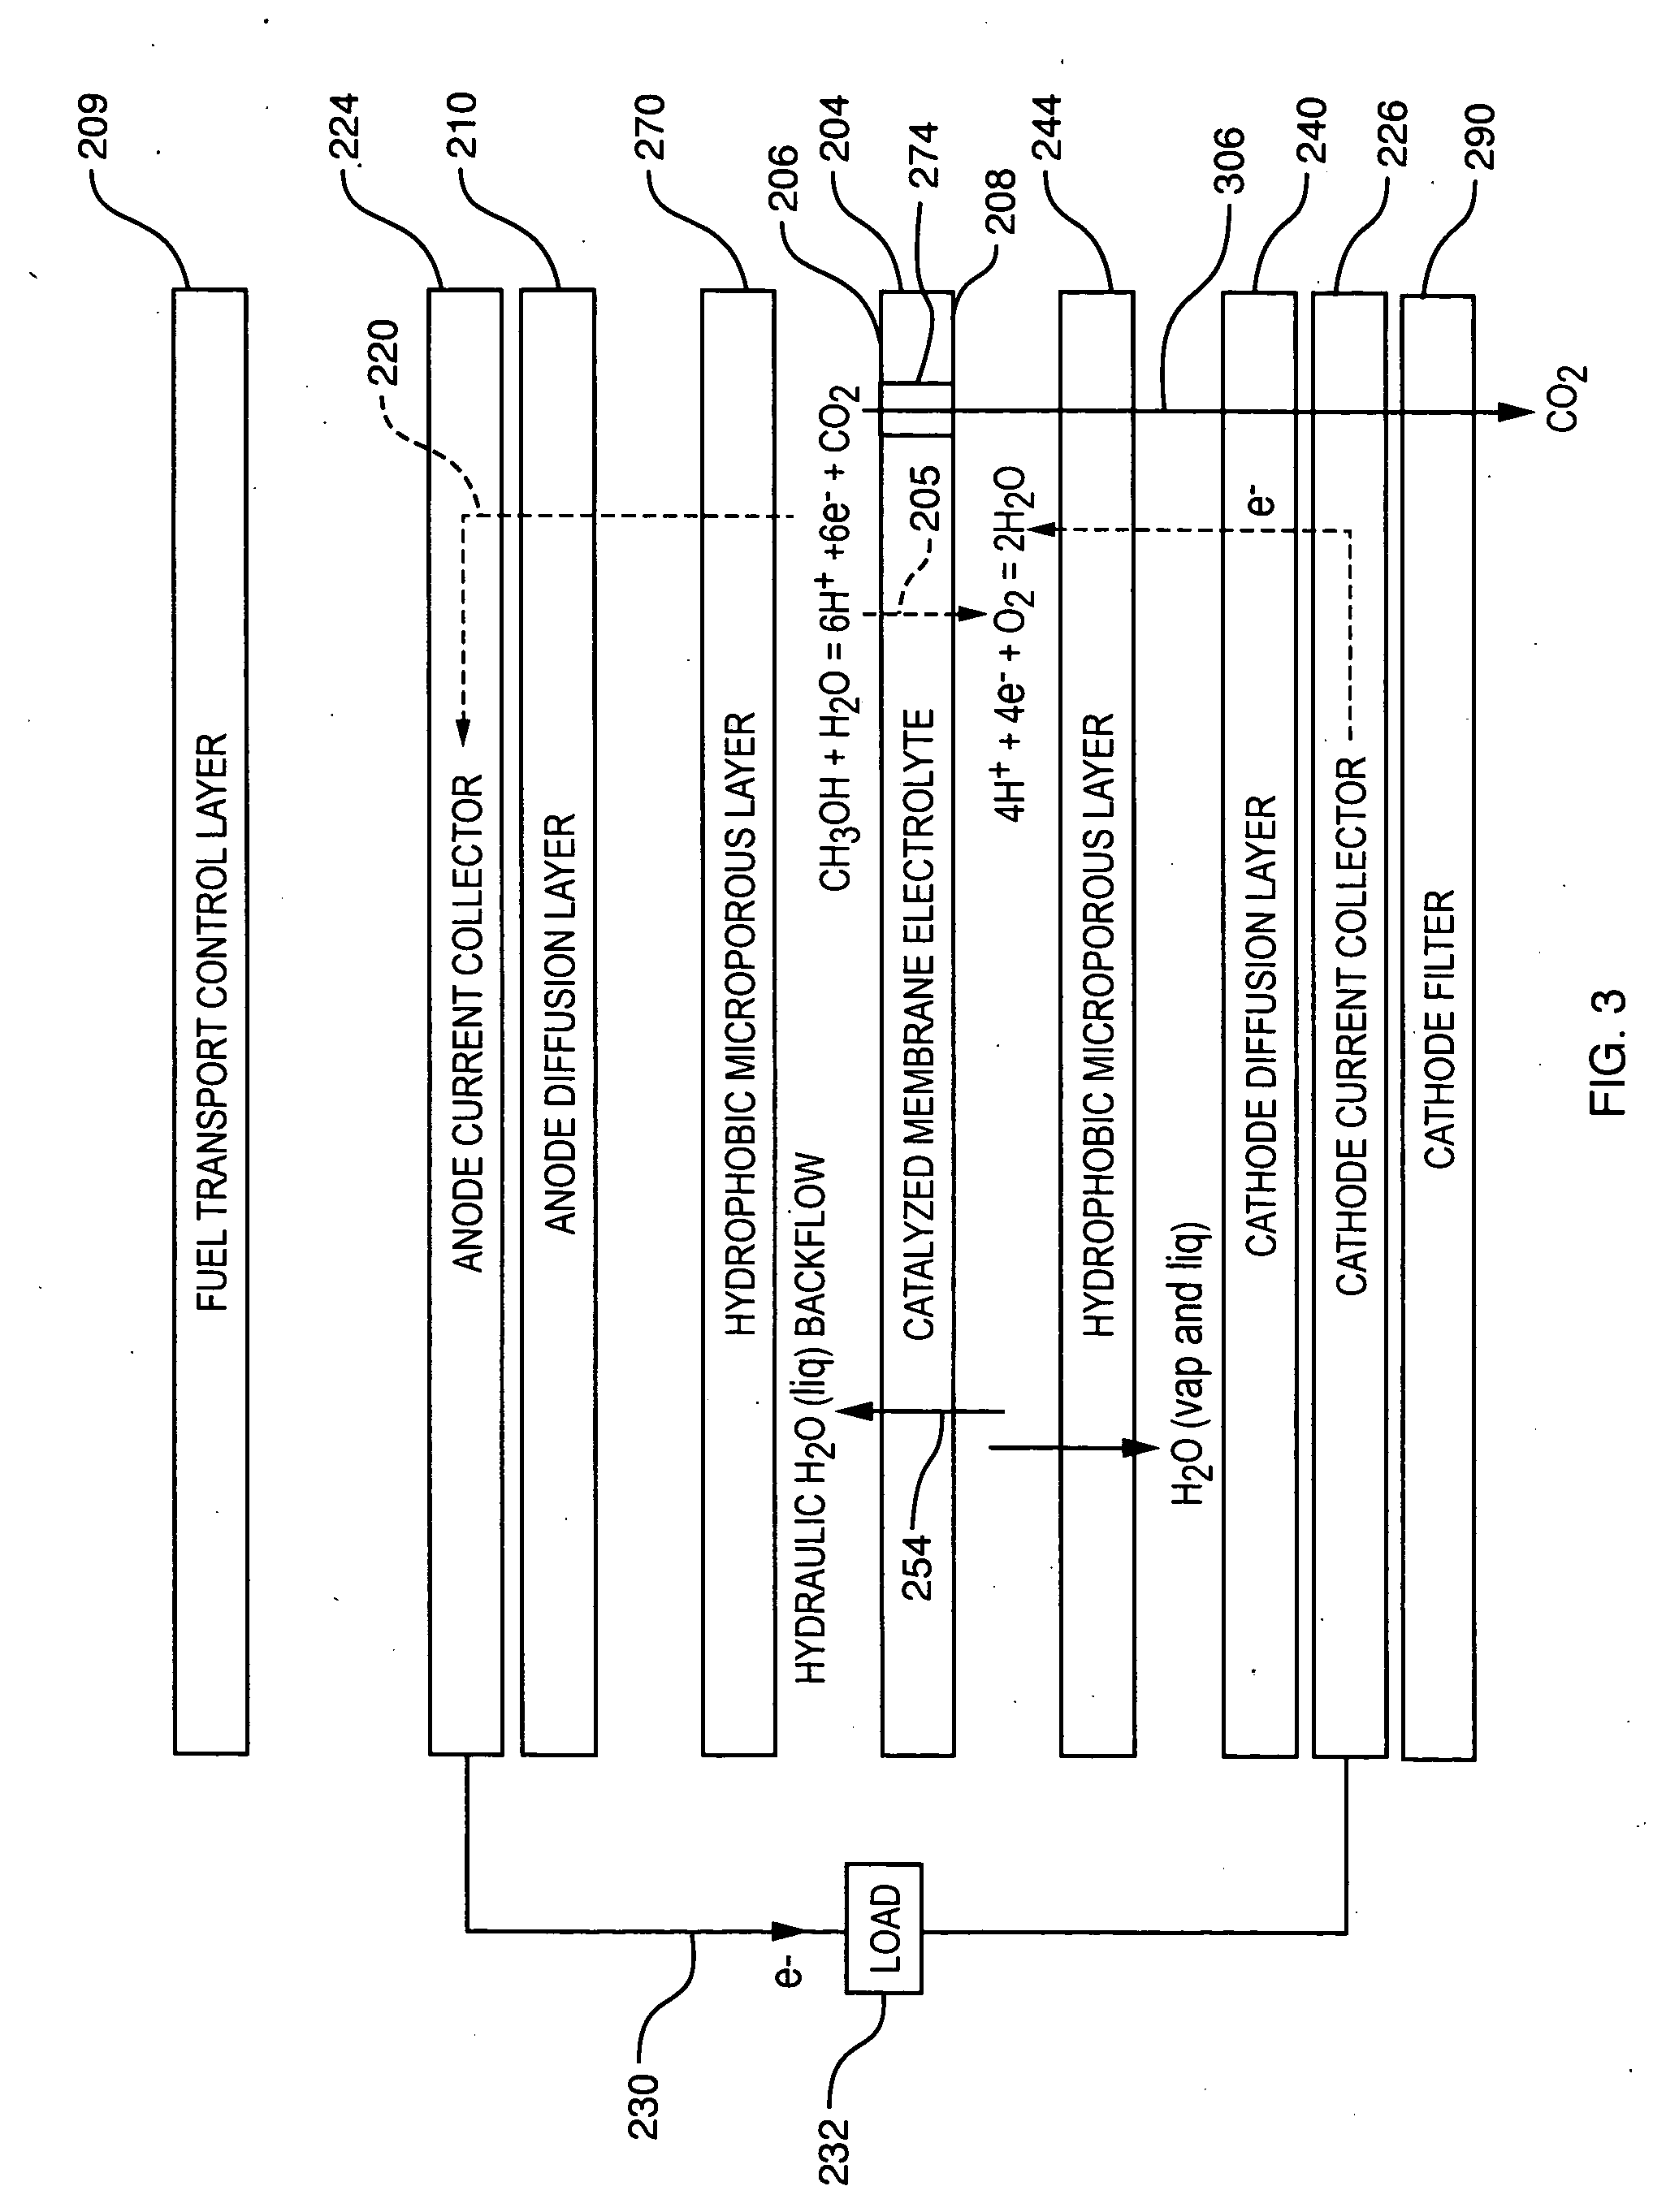 Controlled direct liquid injection vapor feed for a DMFC